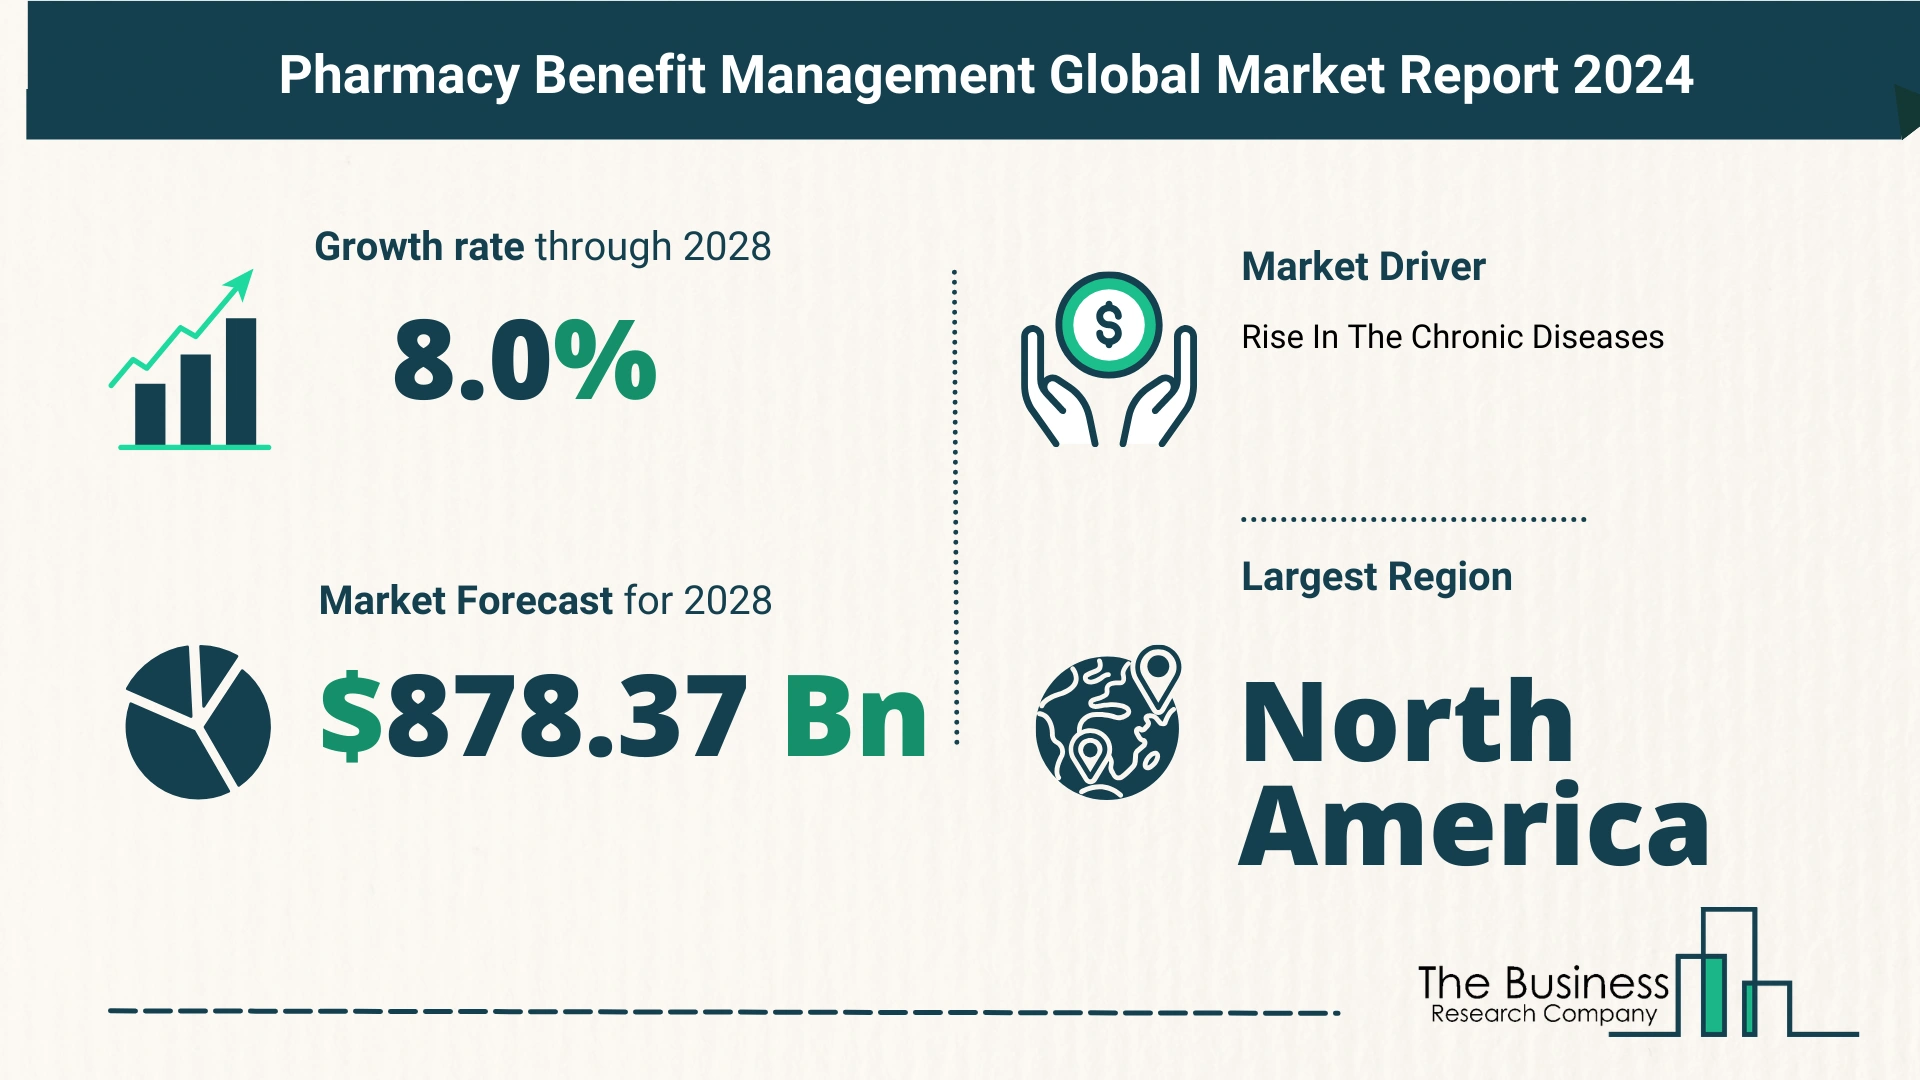 Global Pharmacy Benefit Management Market Overview 2024: Size, Drivers, And Trends